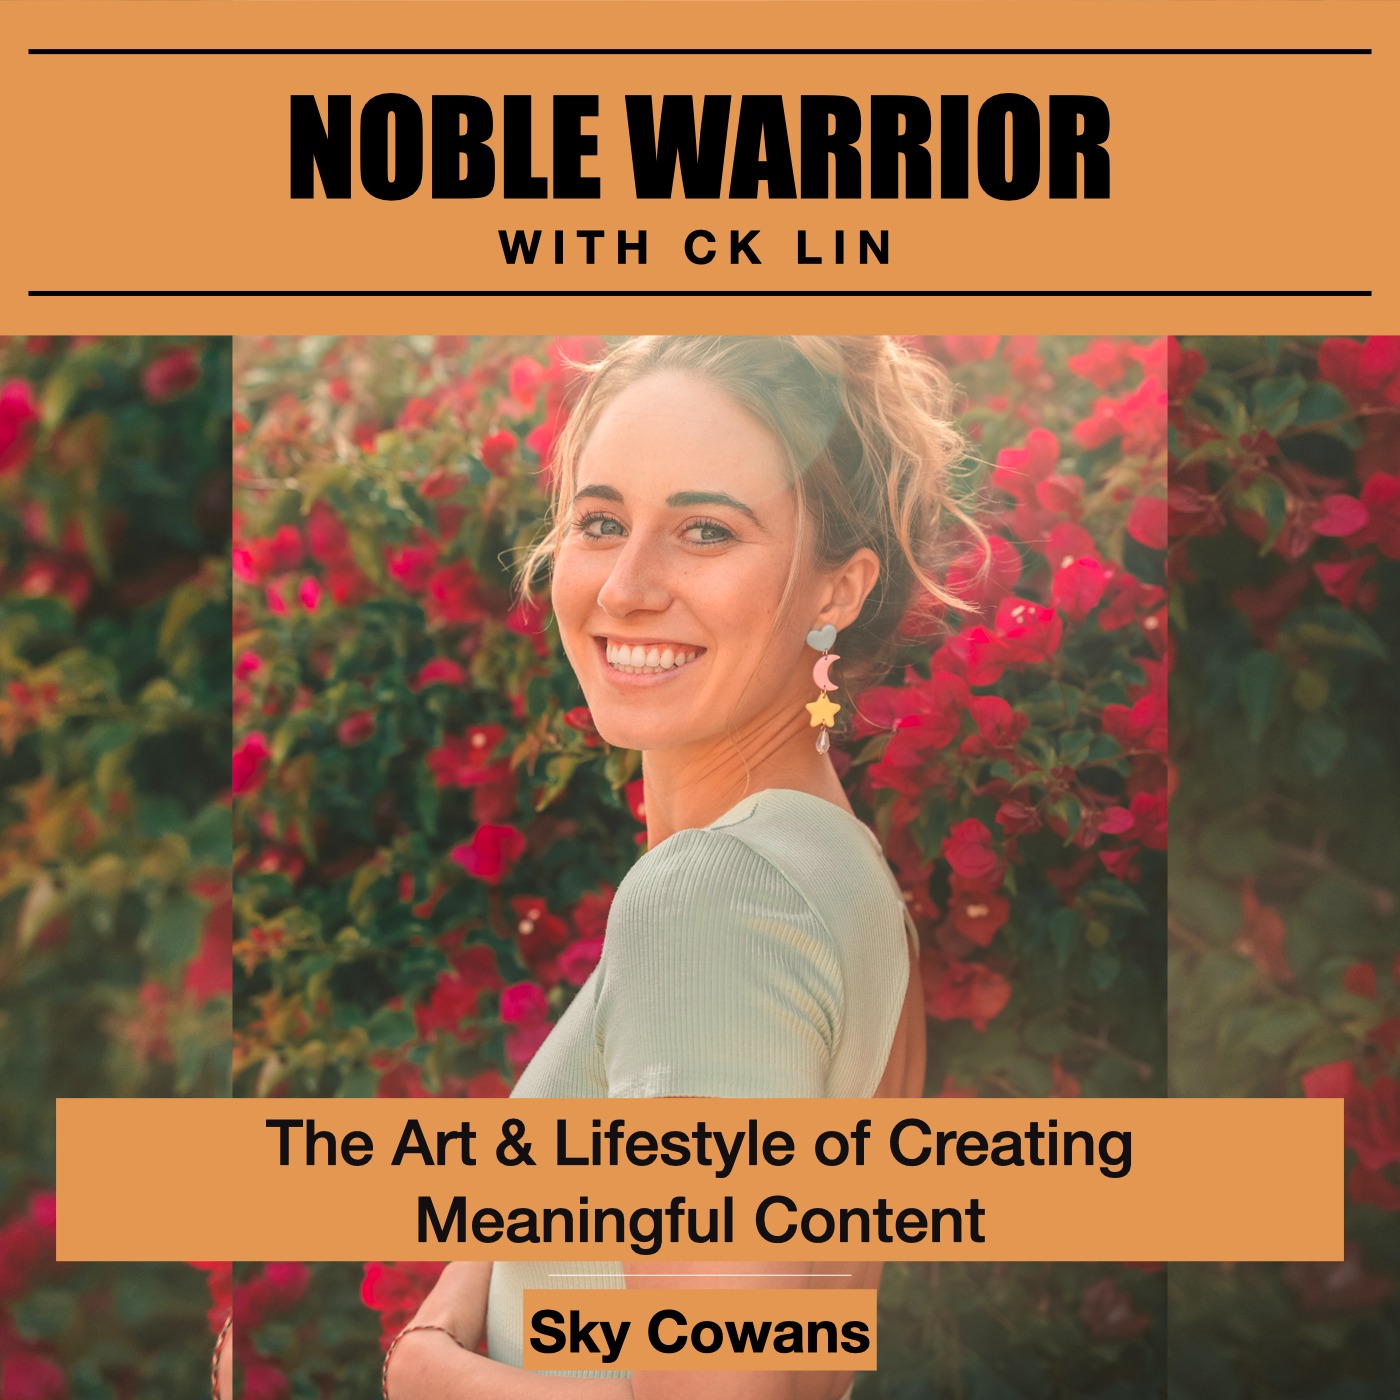 161 Sky Cowans: The Art & Lifestyle of Creating Meaningful Content Image